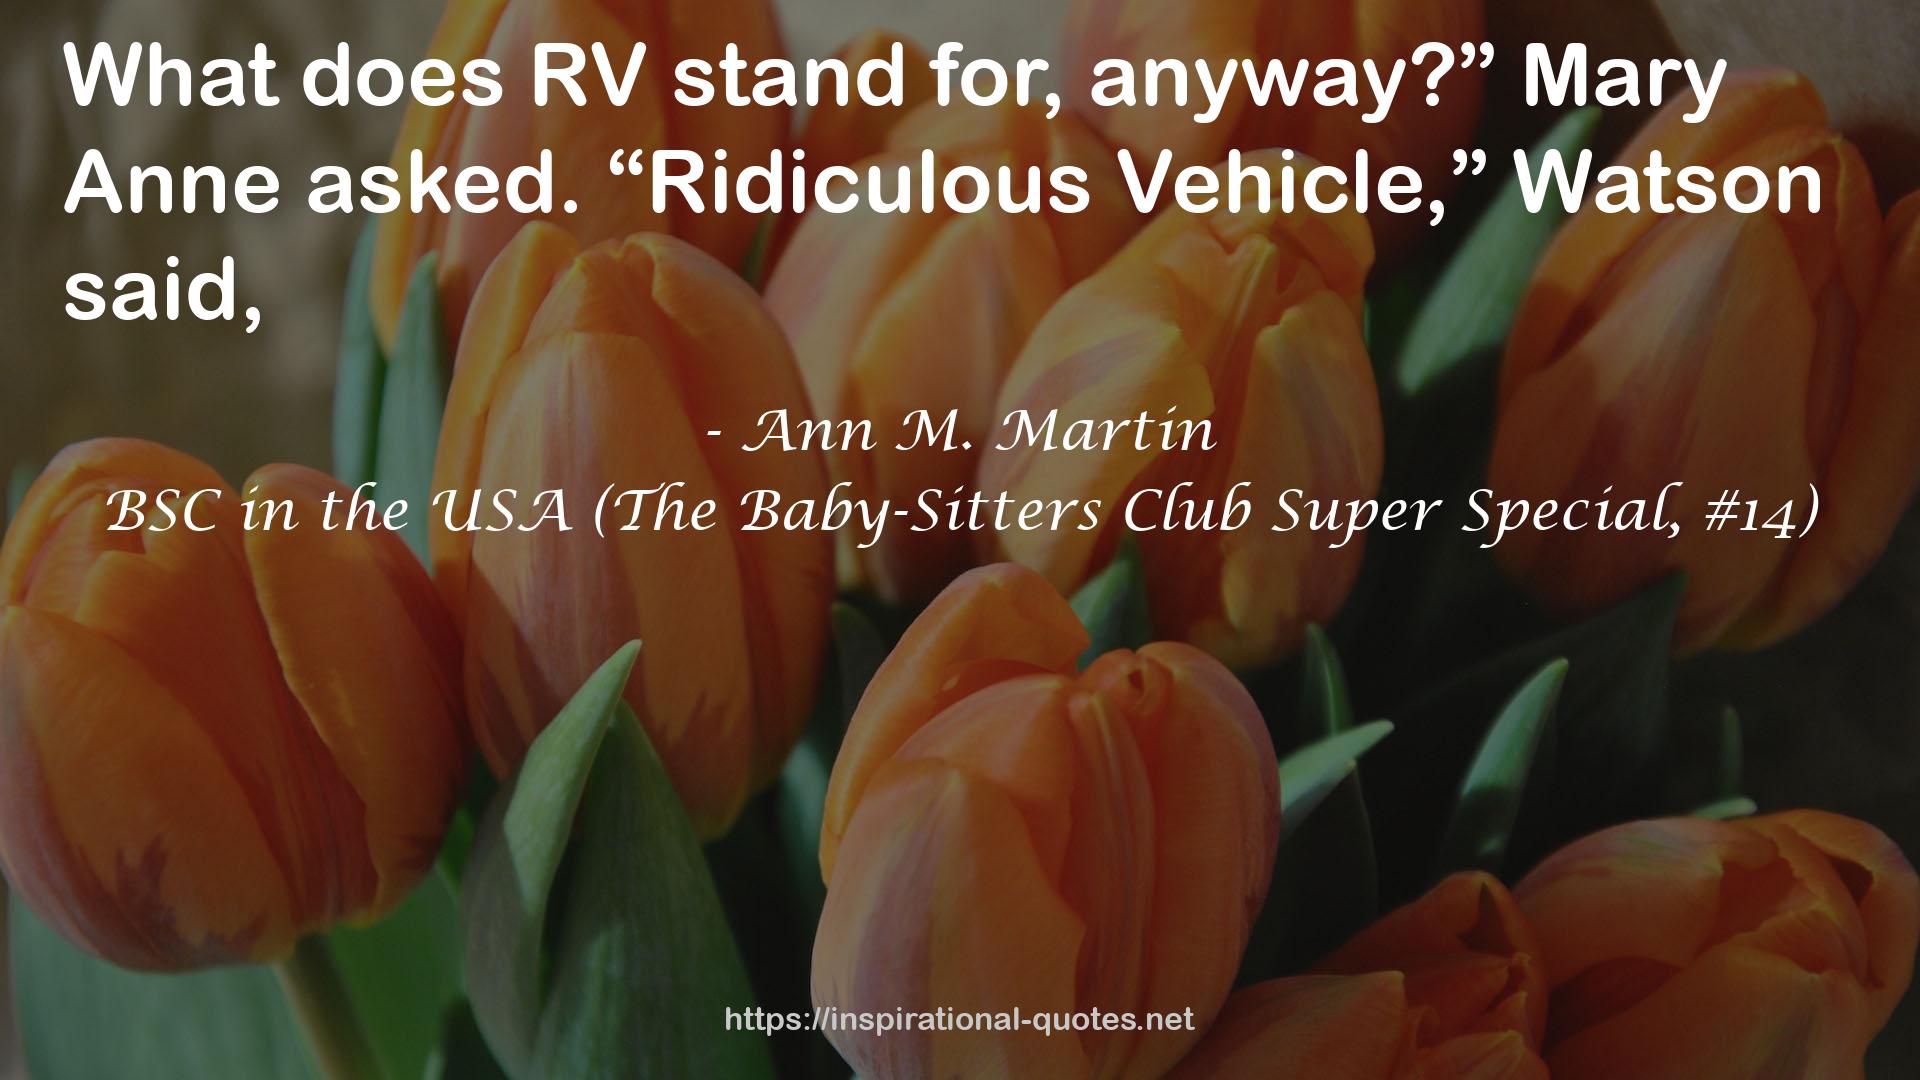 BSC in the USA (The Baby-Sitters Club Super Special, #14) QUOTES